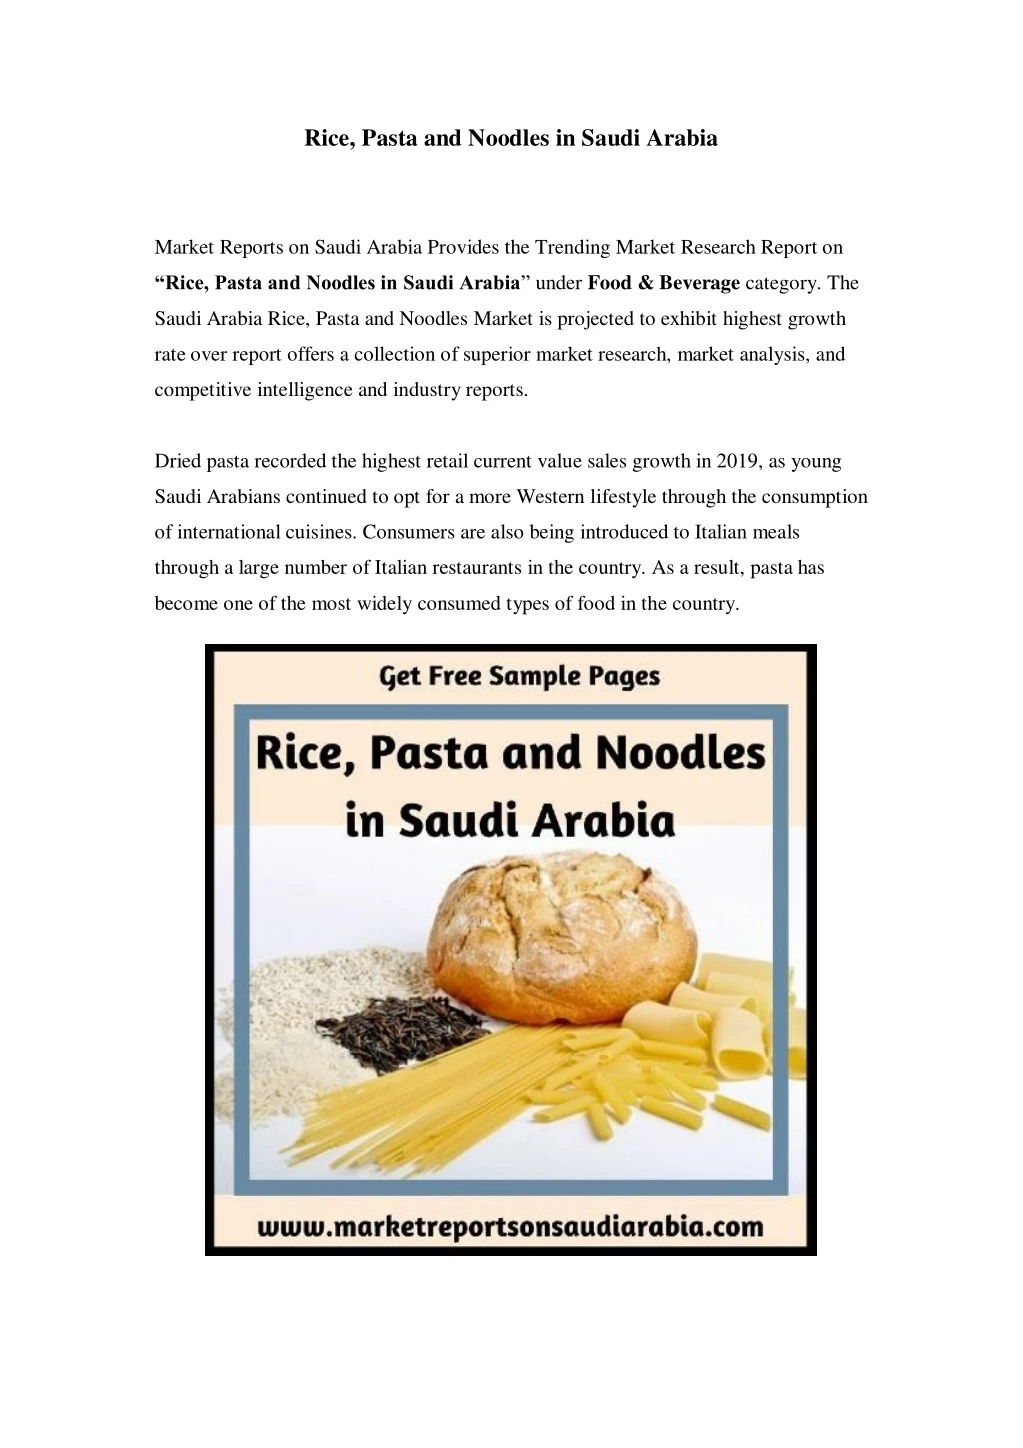 rice pasta and noodles in saudi arabia